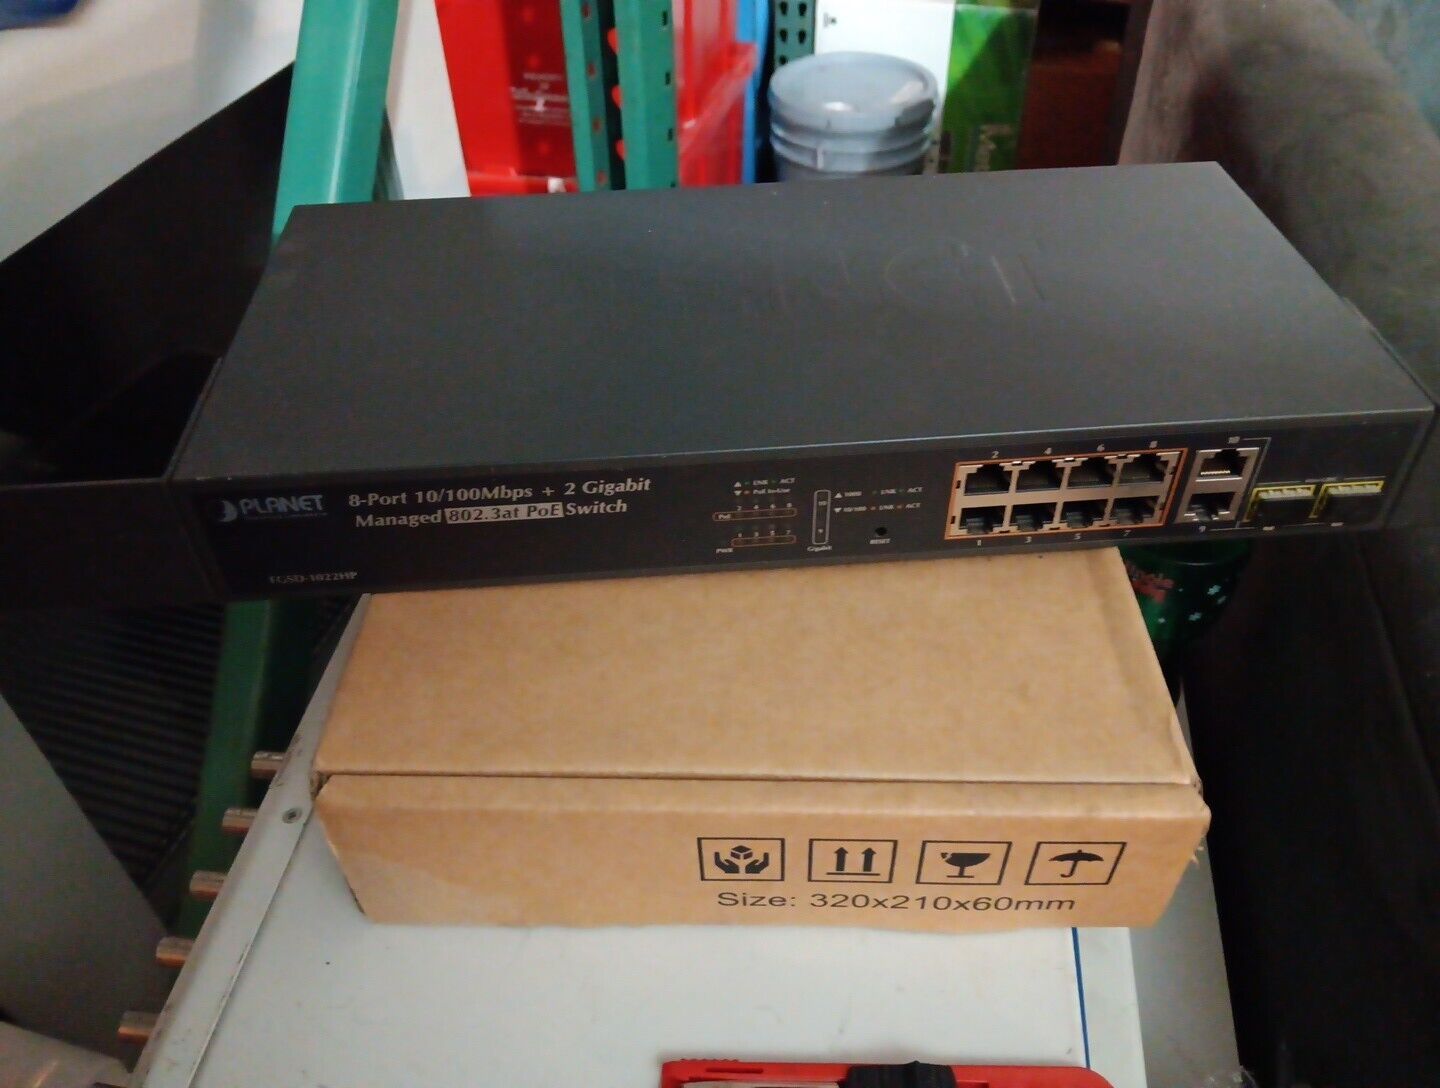 Planet Networking FGSD-1022P 8-Port 10/100Mbps + 2 Gigabit Managed PoE Switch